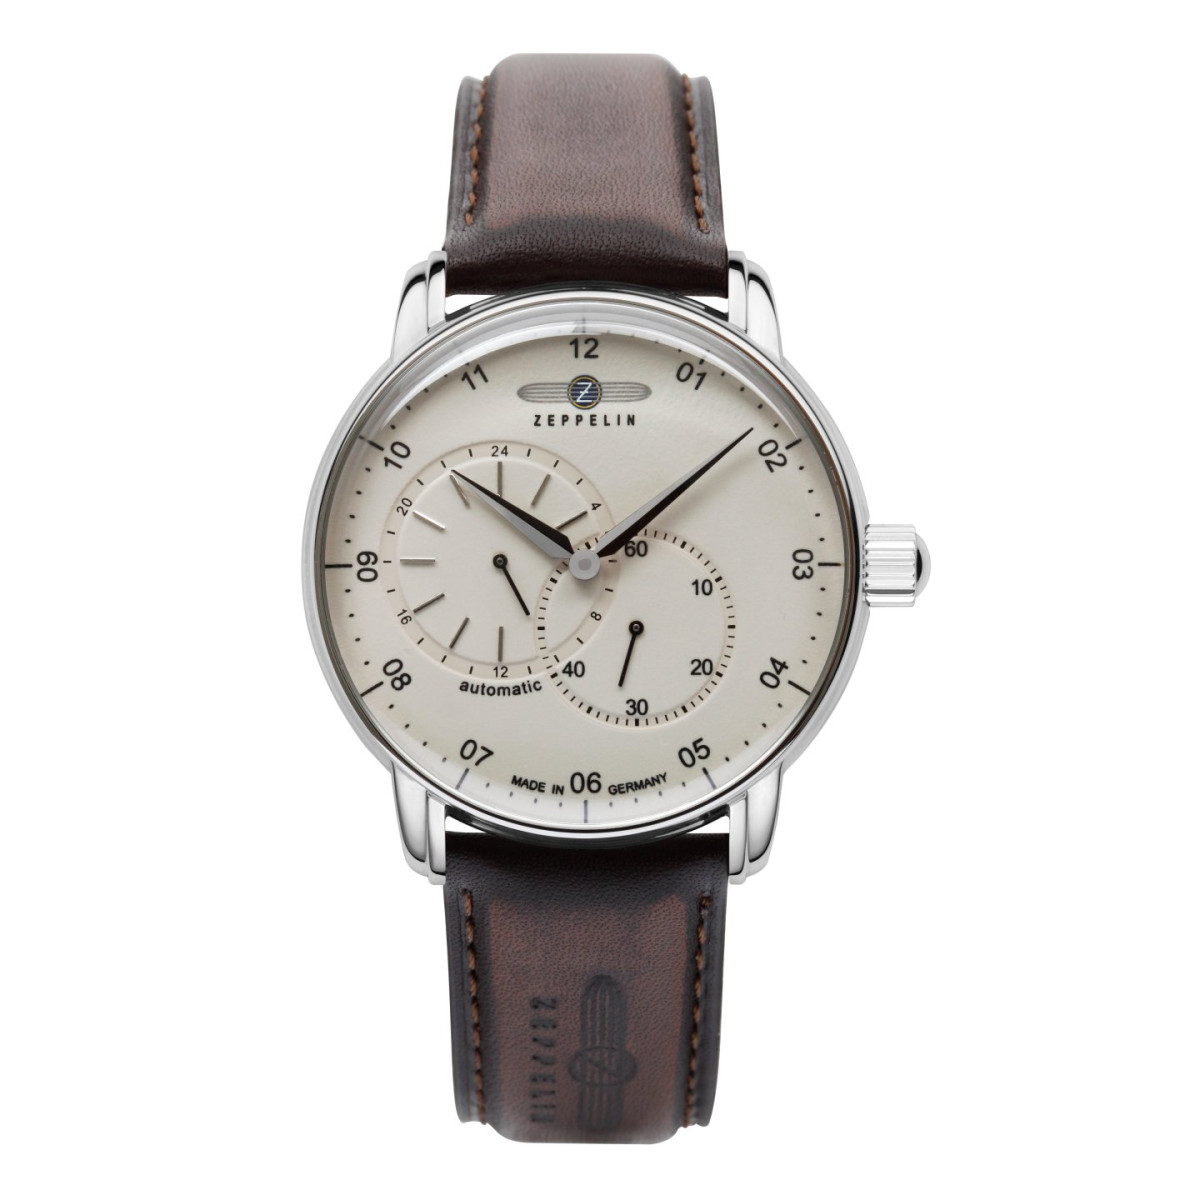 Zeppelin New Captain's Line Automatic with 24-hour display and leather strap